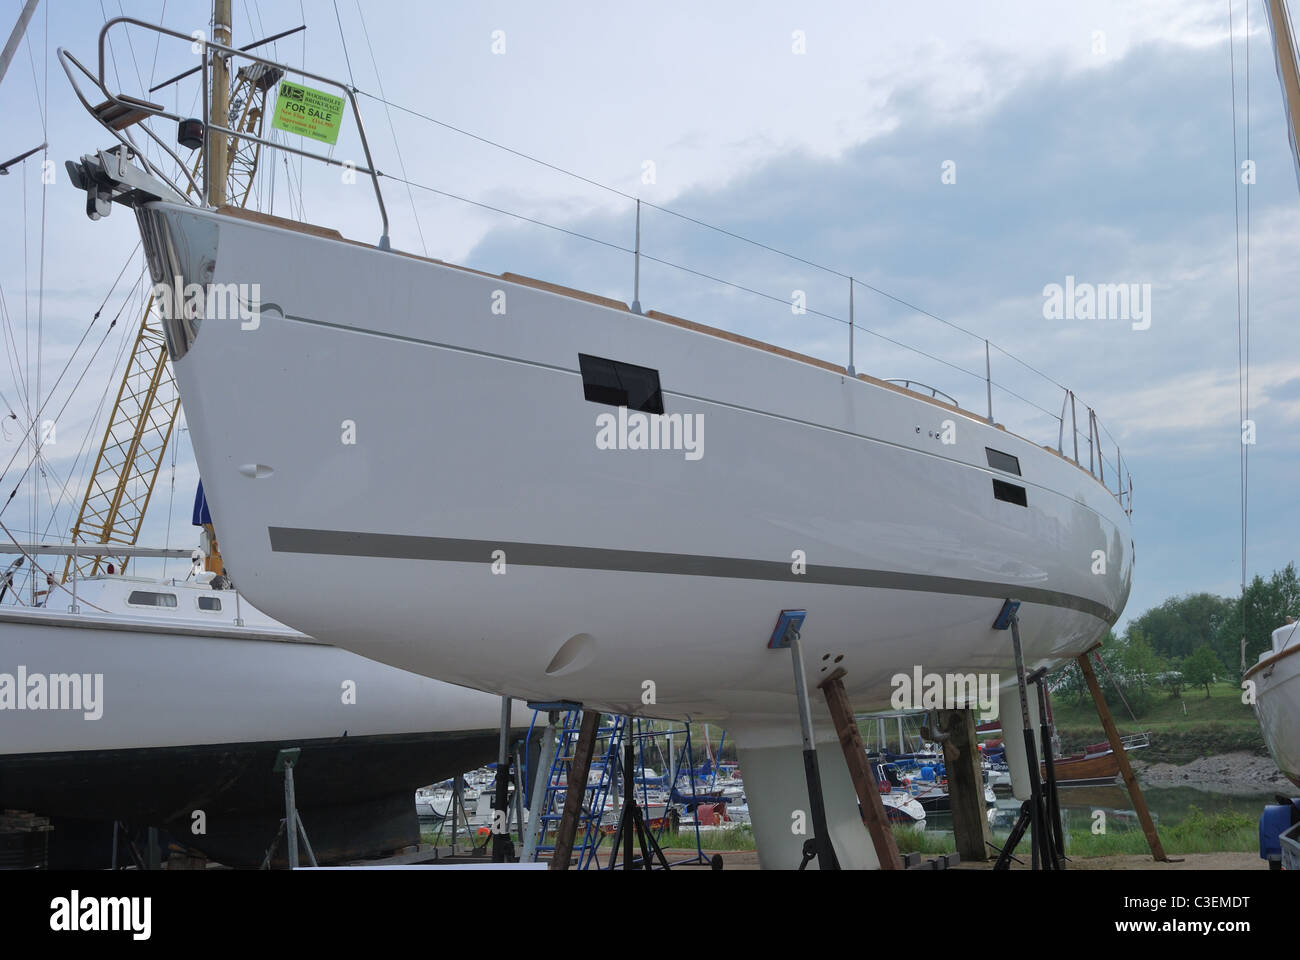 Luxury yacht for sale Stock Photo